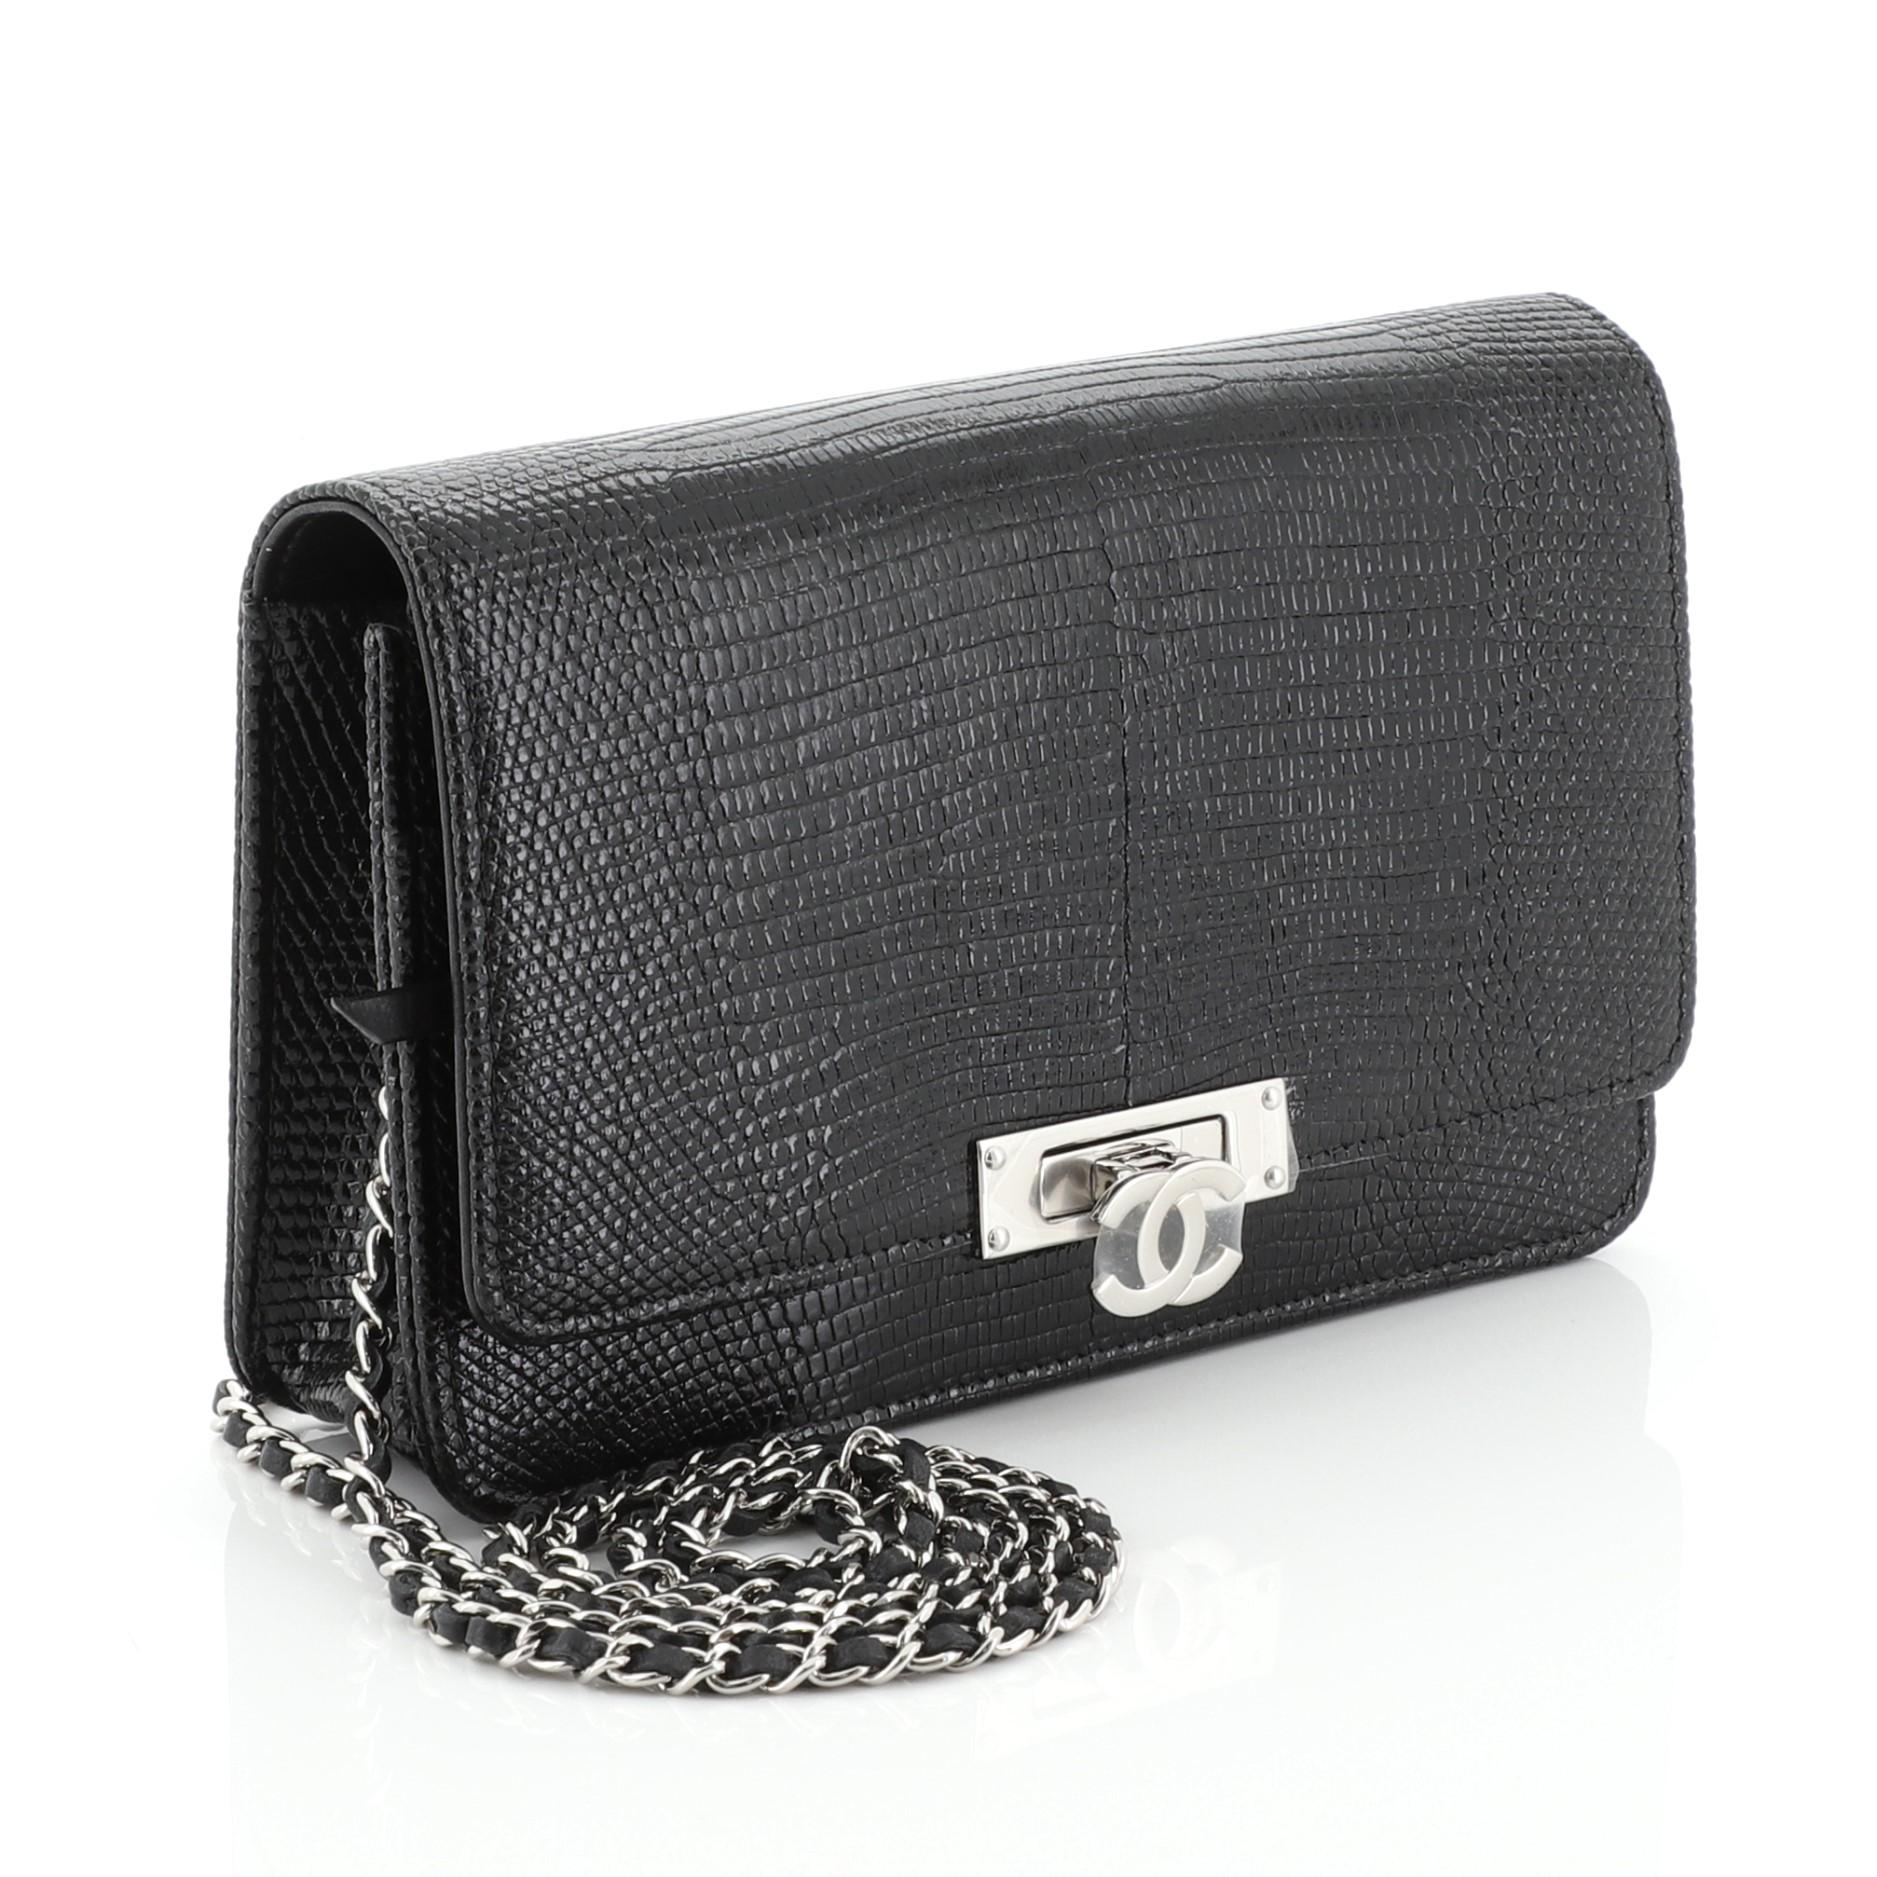 Black Chanel Golden Class Wallet On Chain Lizard Embossed Leather 